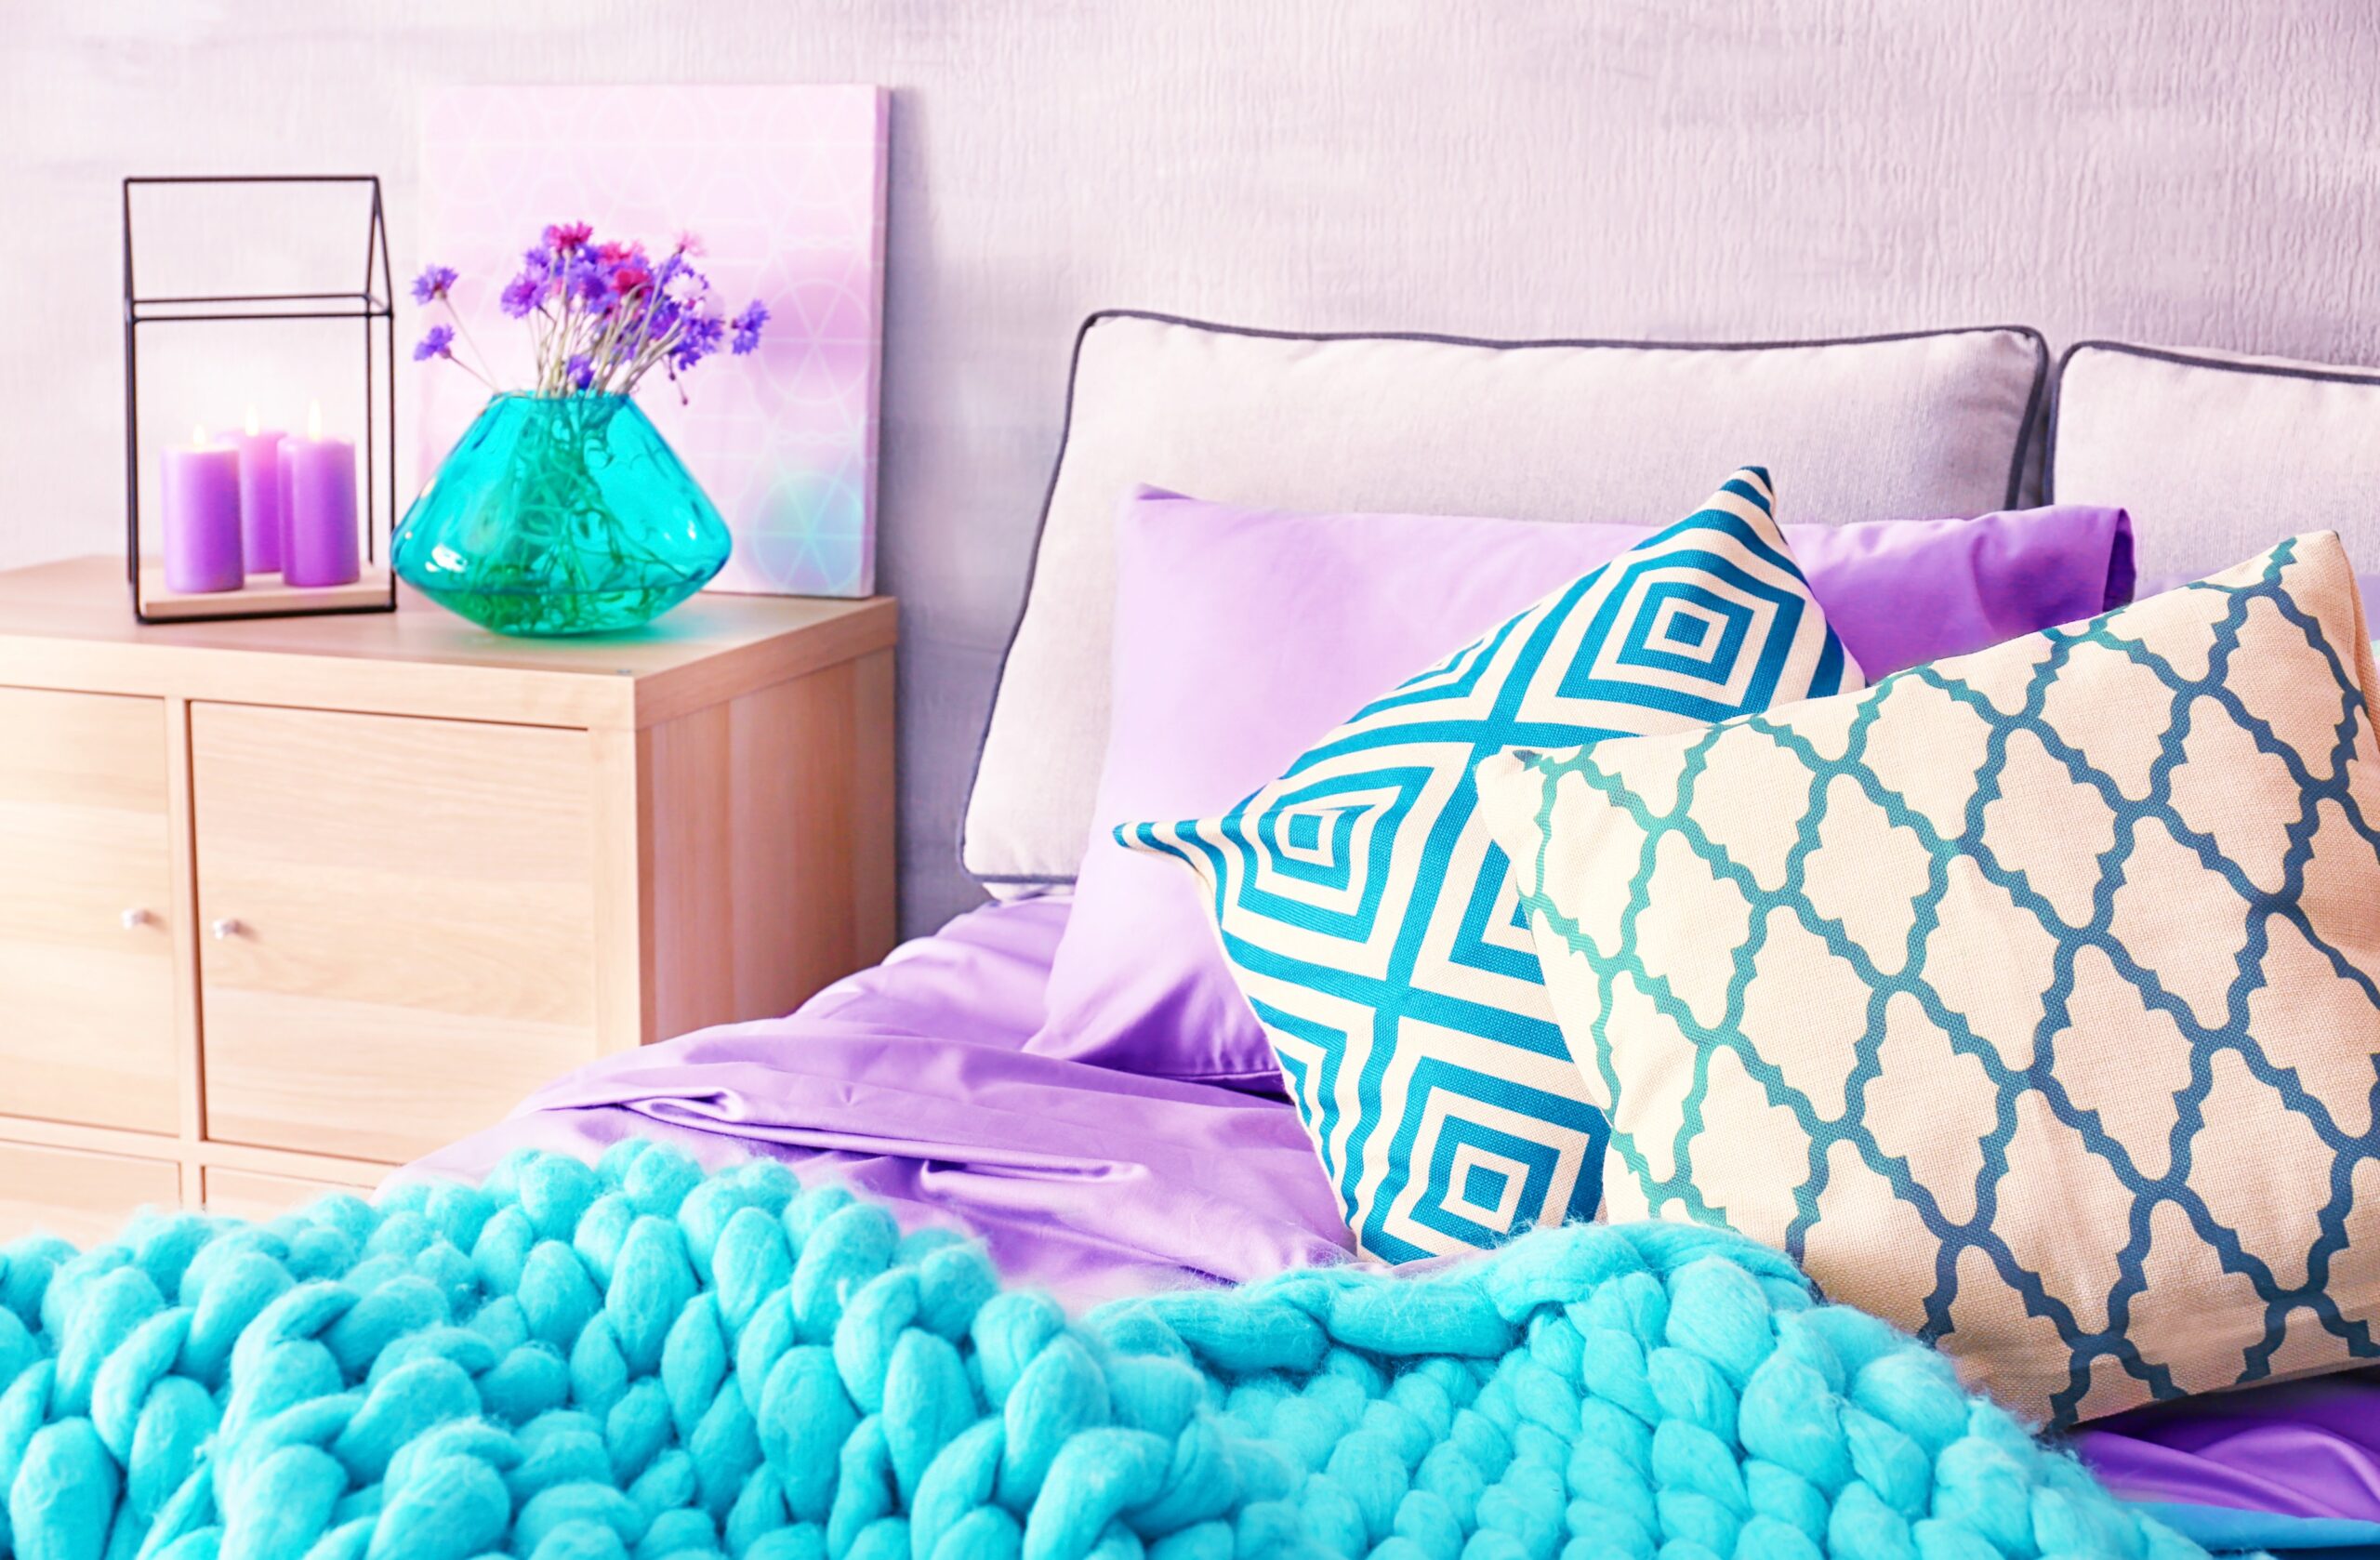 <img src="purple.jpg" alt="purple and teal colourful bed"/>